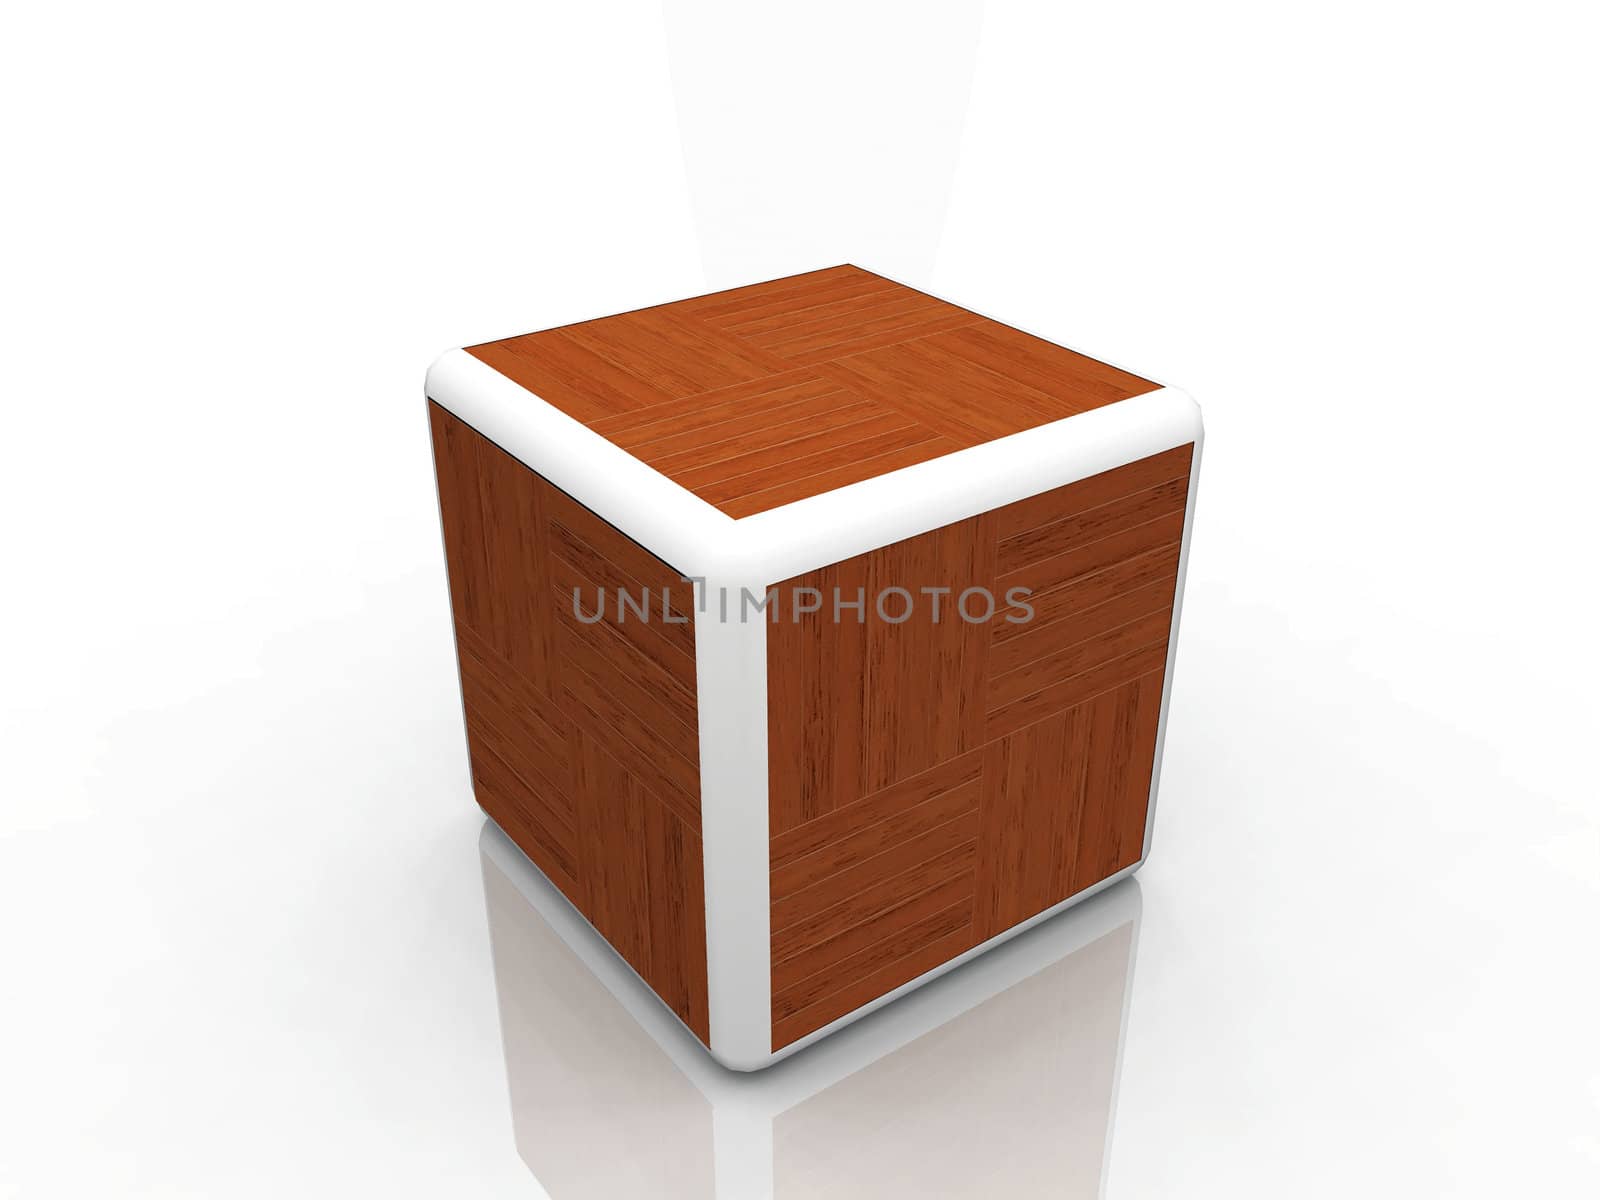 cube with a wood texture